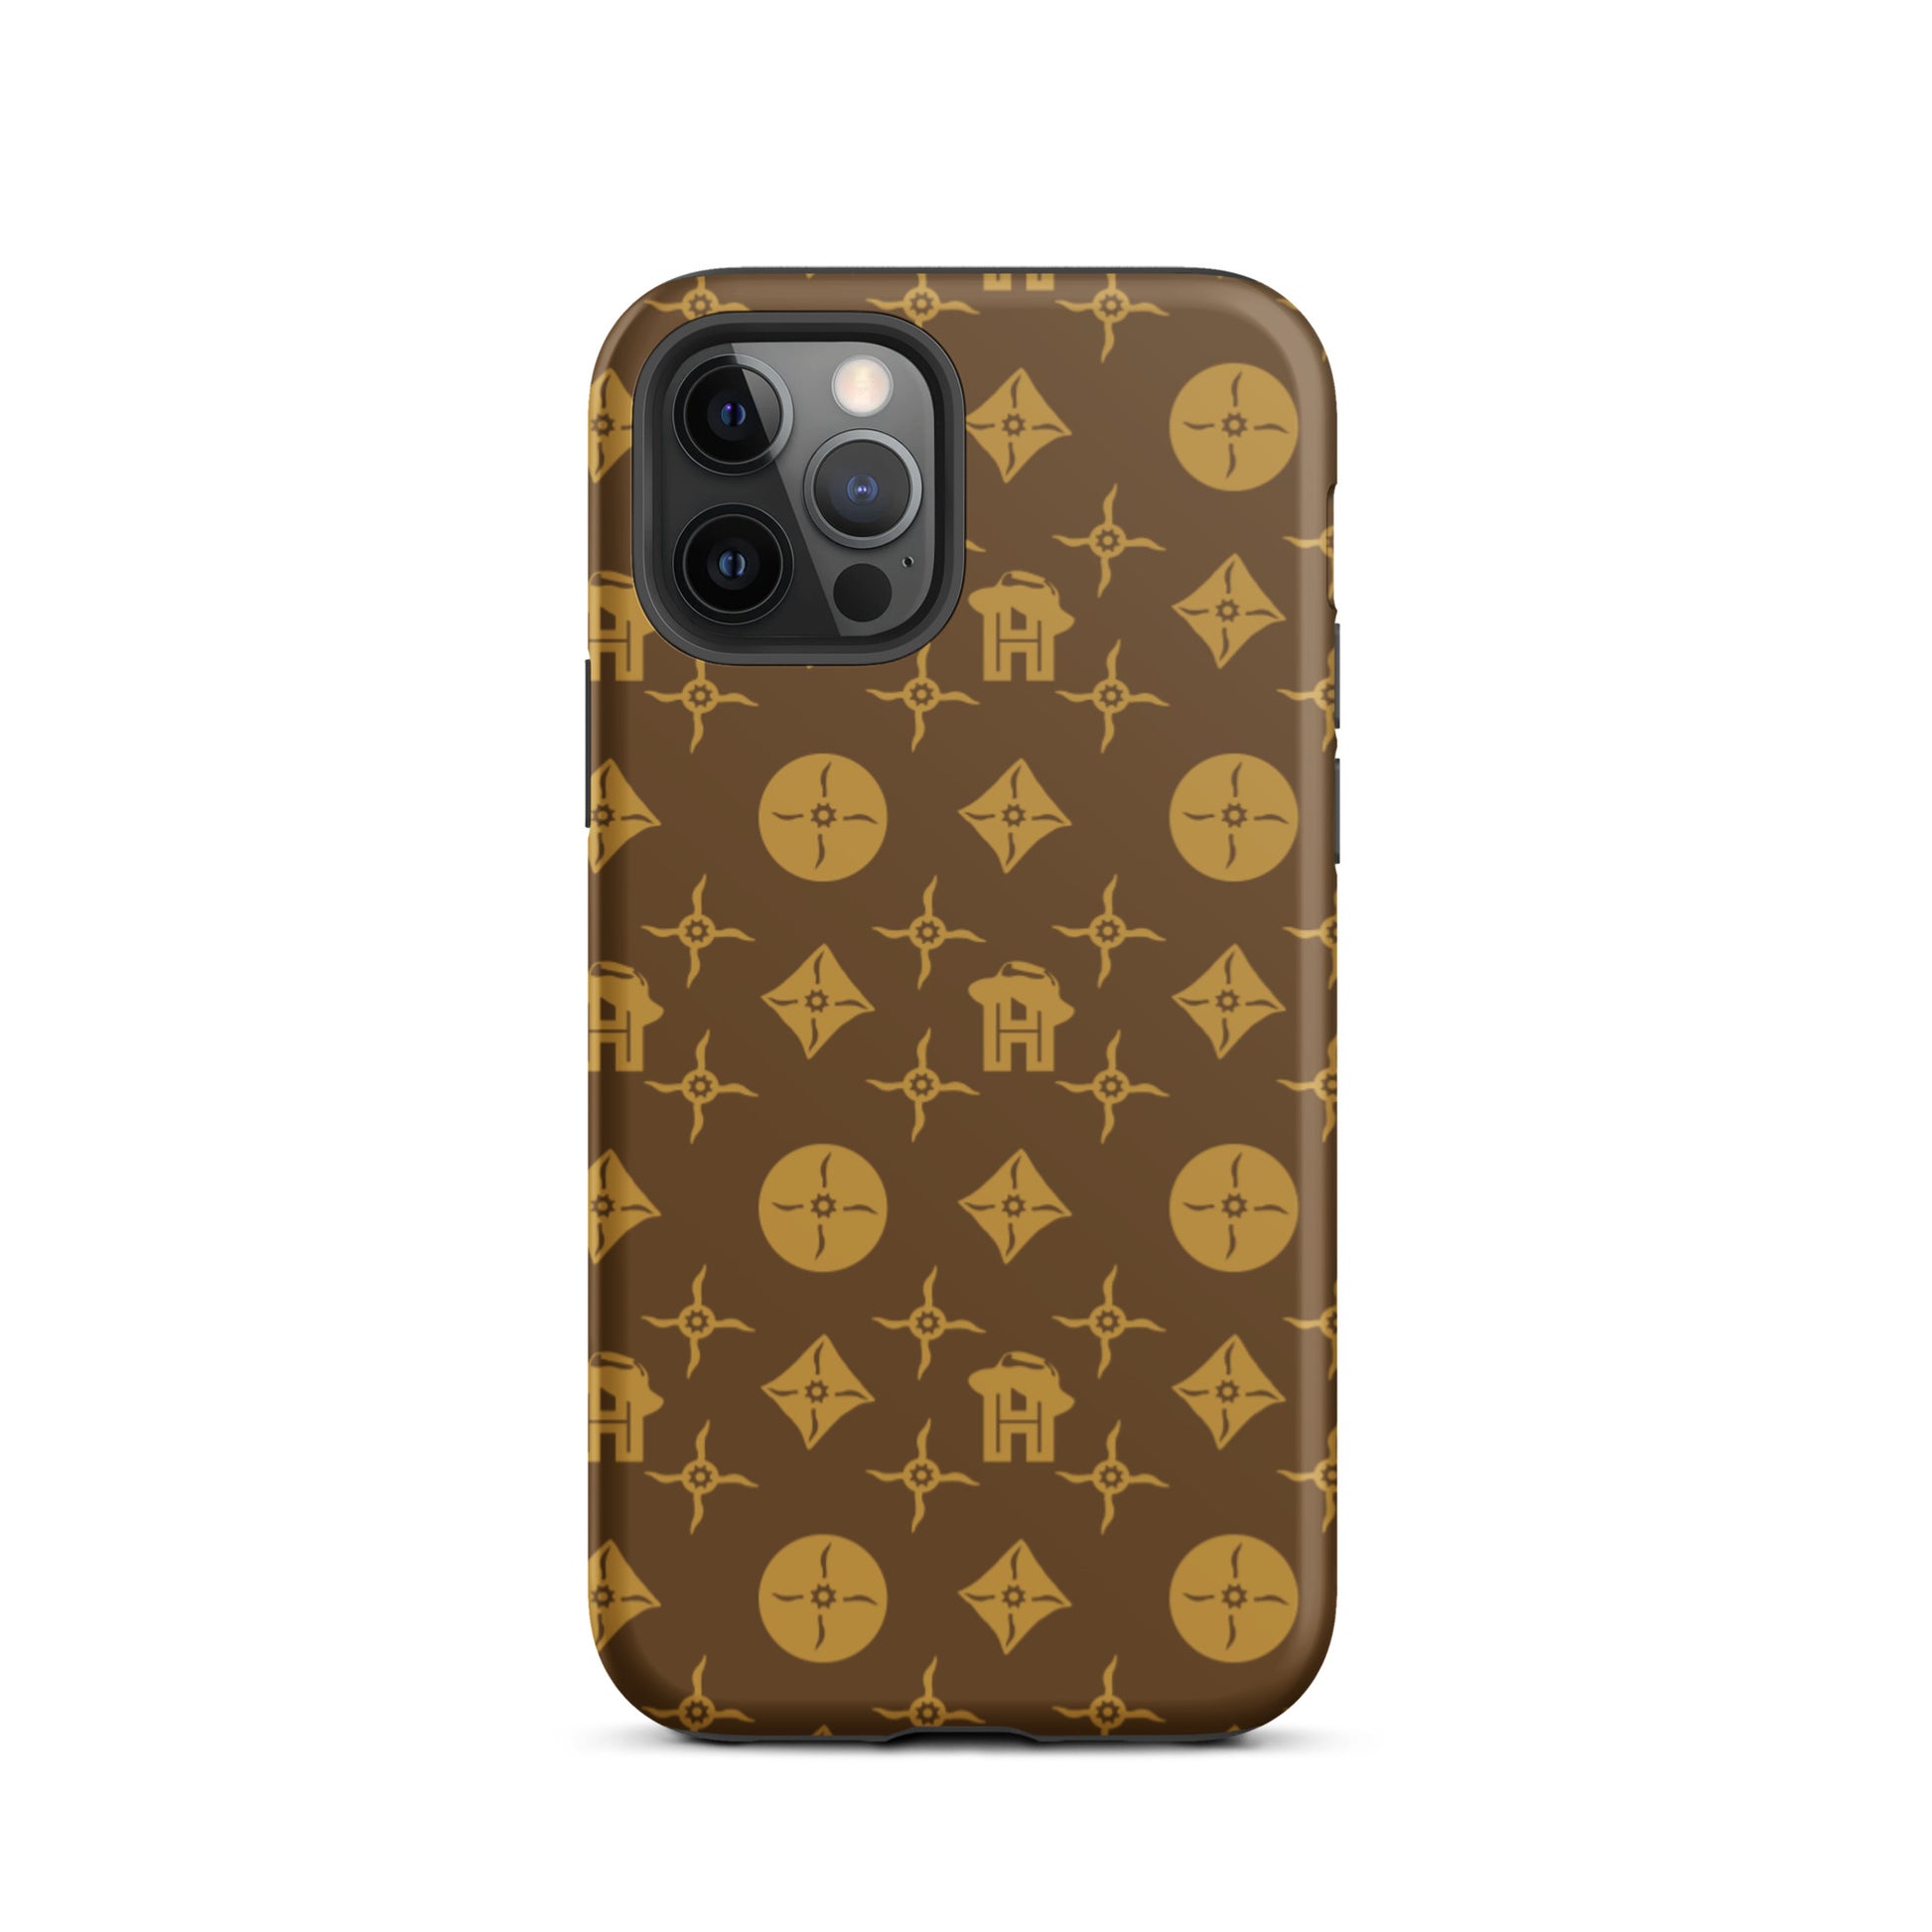 Gold and Brown Monogram Tough iPhone case - HipHatter